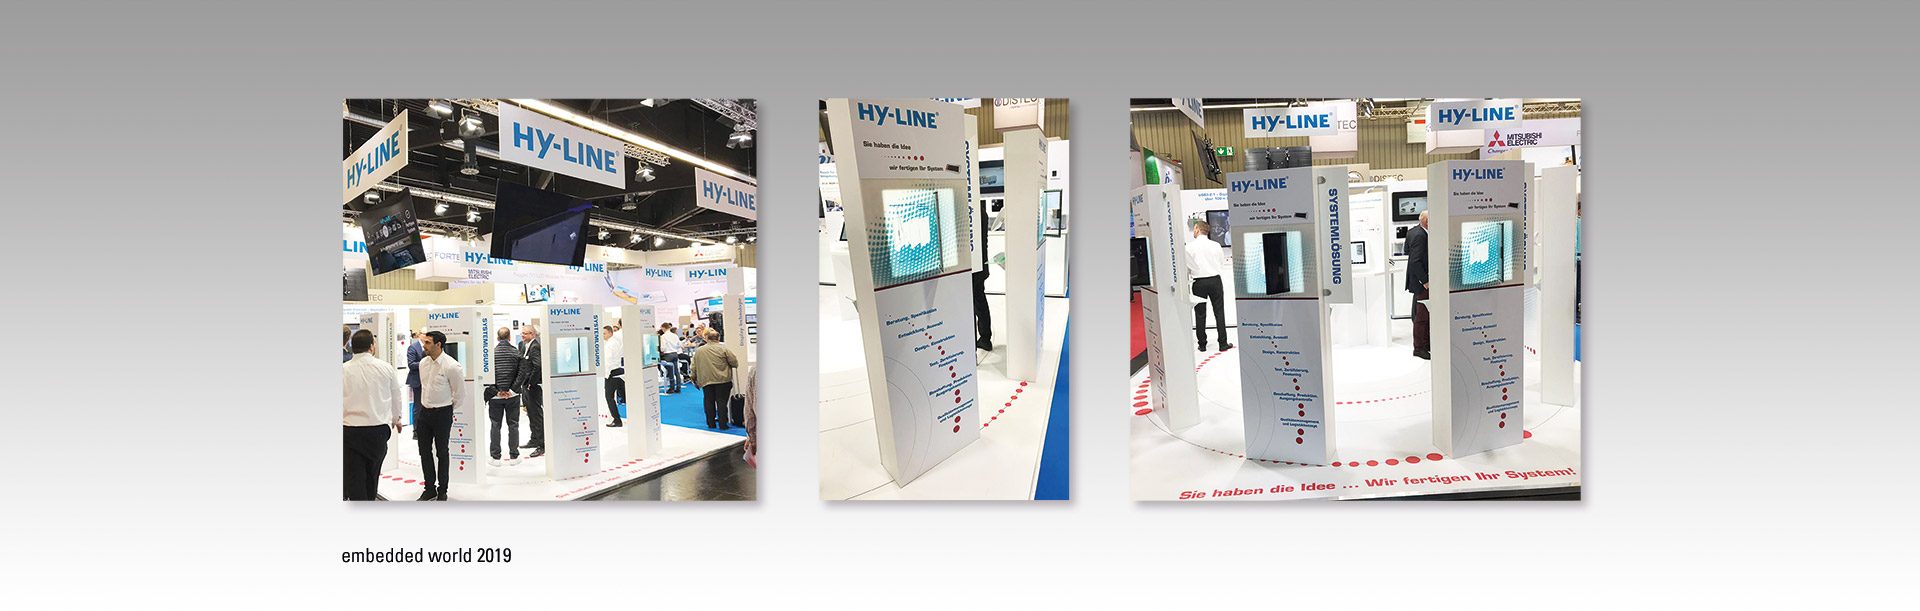 HY-LINE Messestand Embedded World 2019